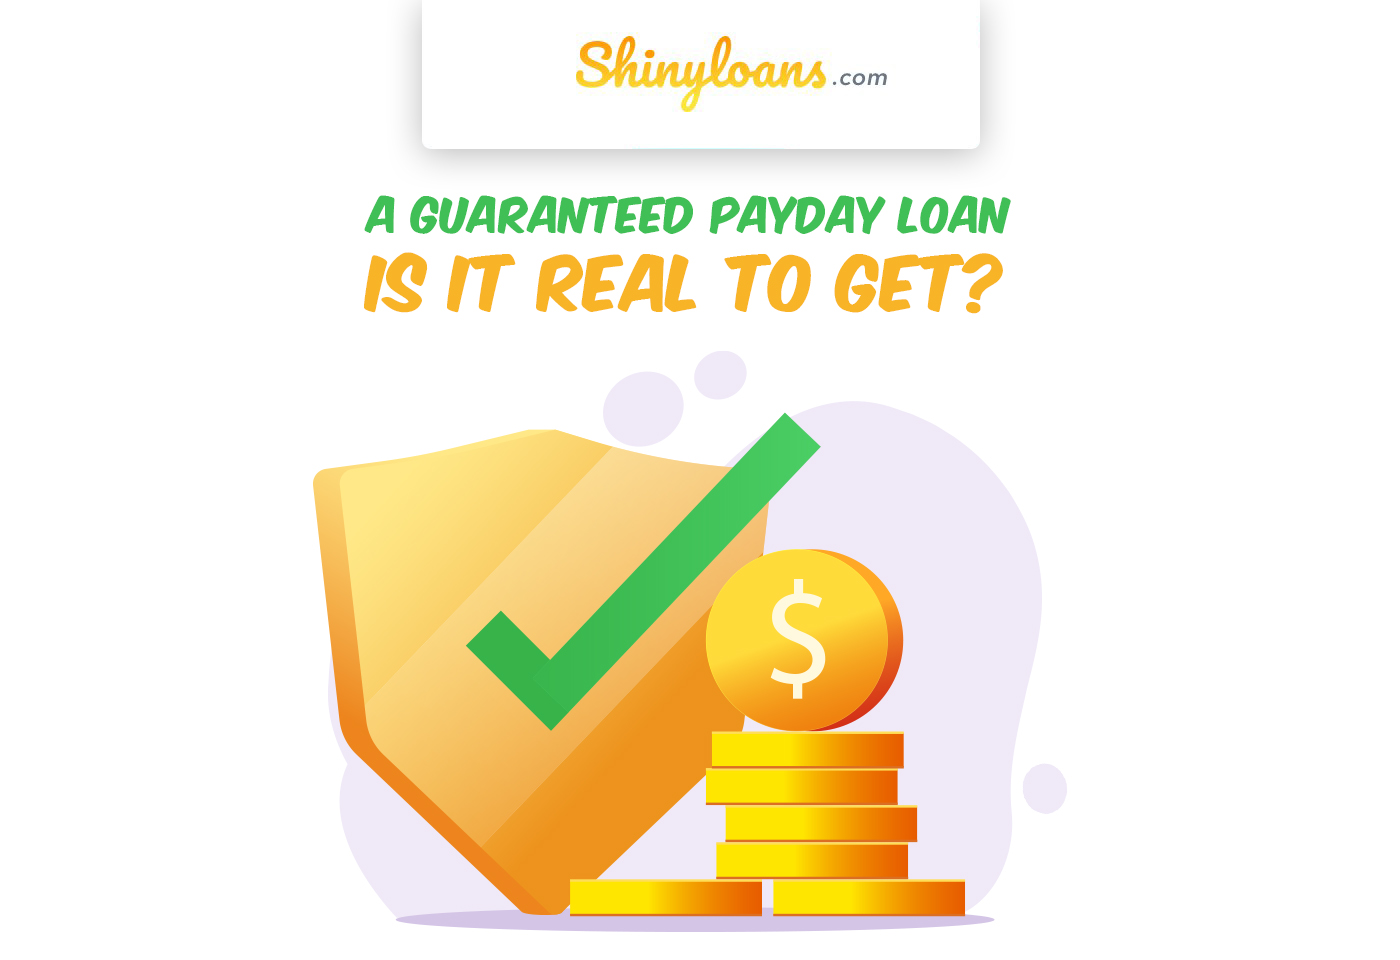 A Guaranteed Payday Loan - Is It Real to Get?